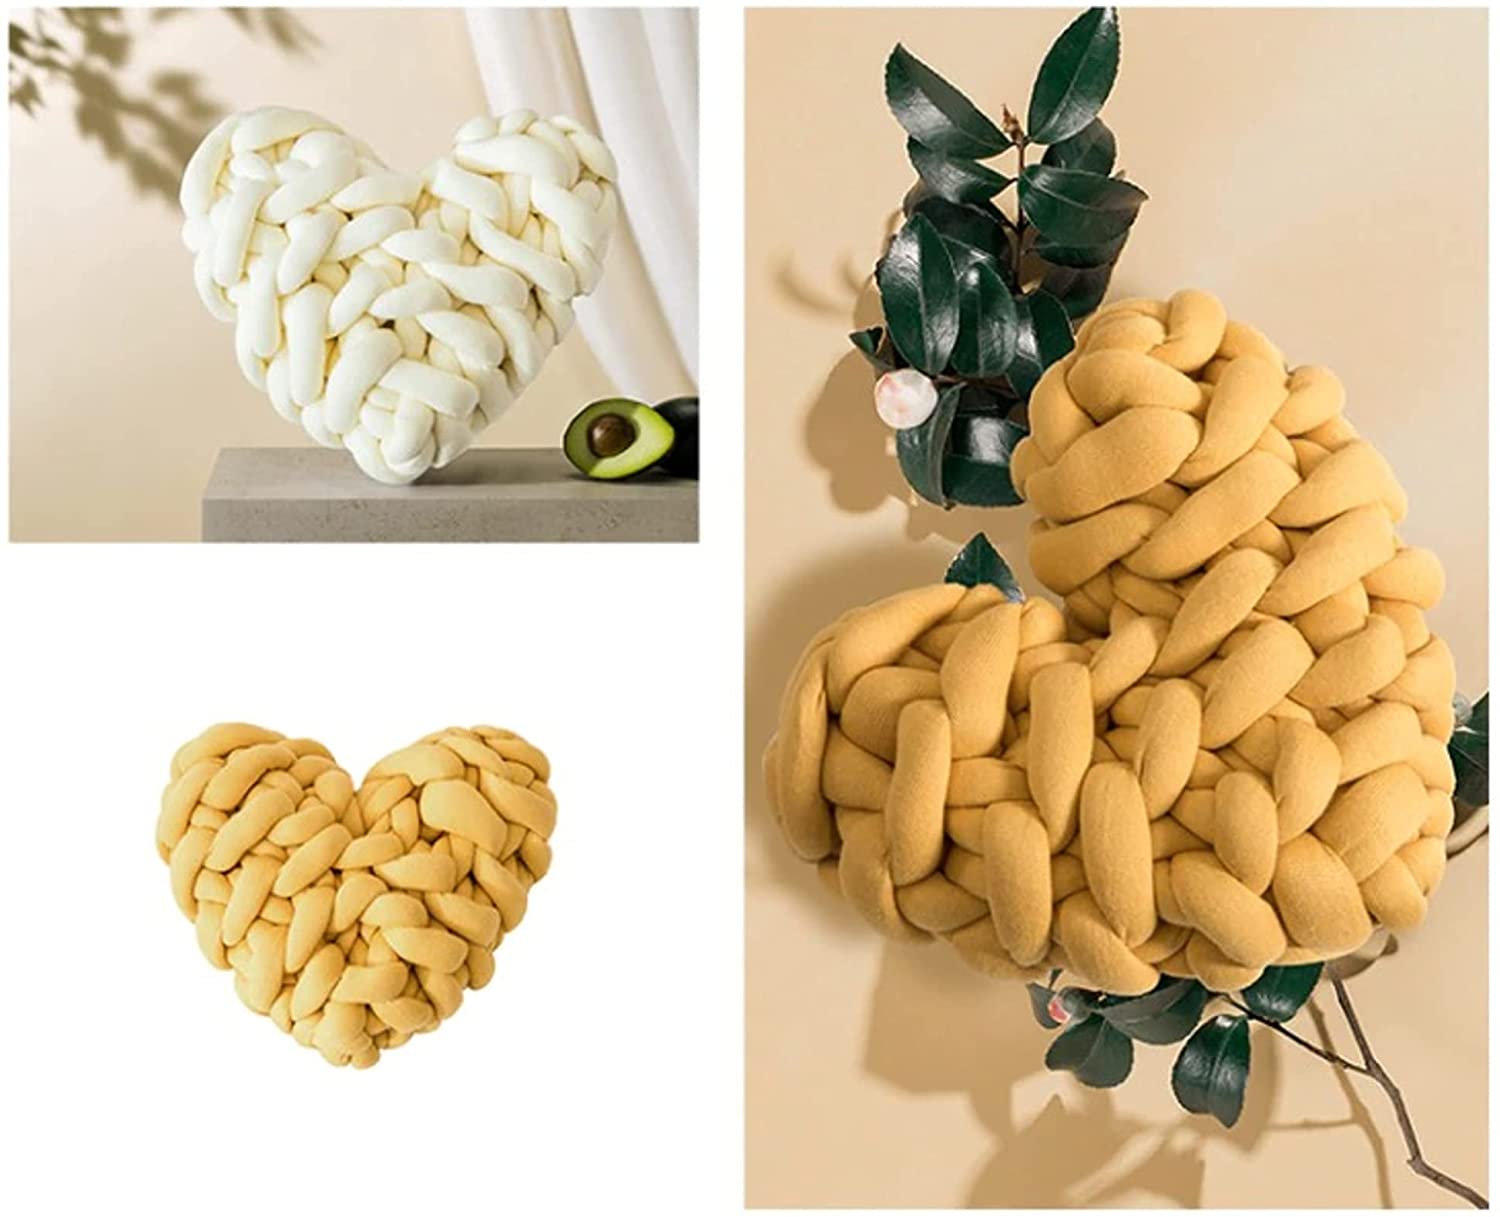 Chunky Knitted Heart Pillow - Metfine